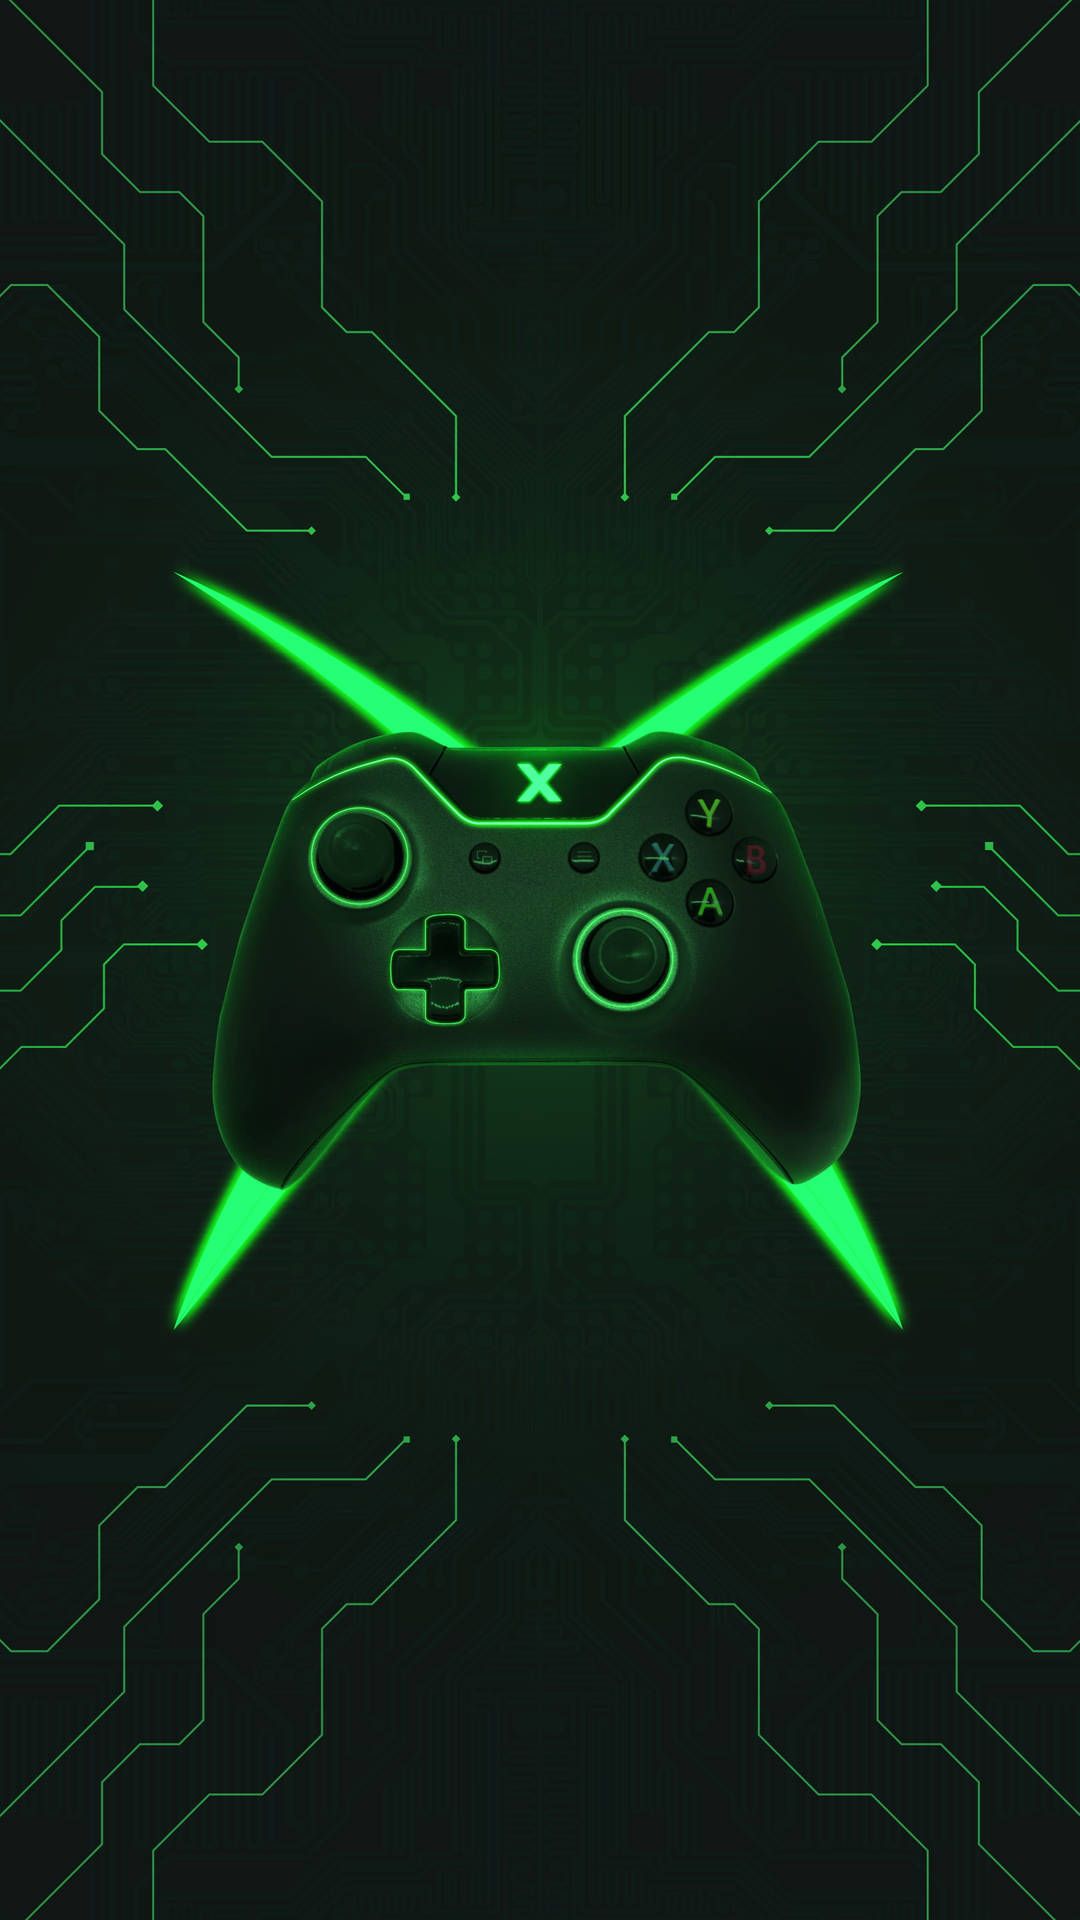 Neon Green Aesthetic Wallpaper Full HD, 4K Free to Use